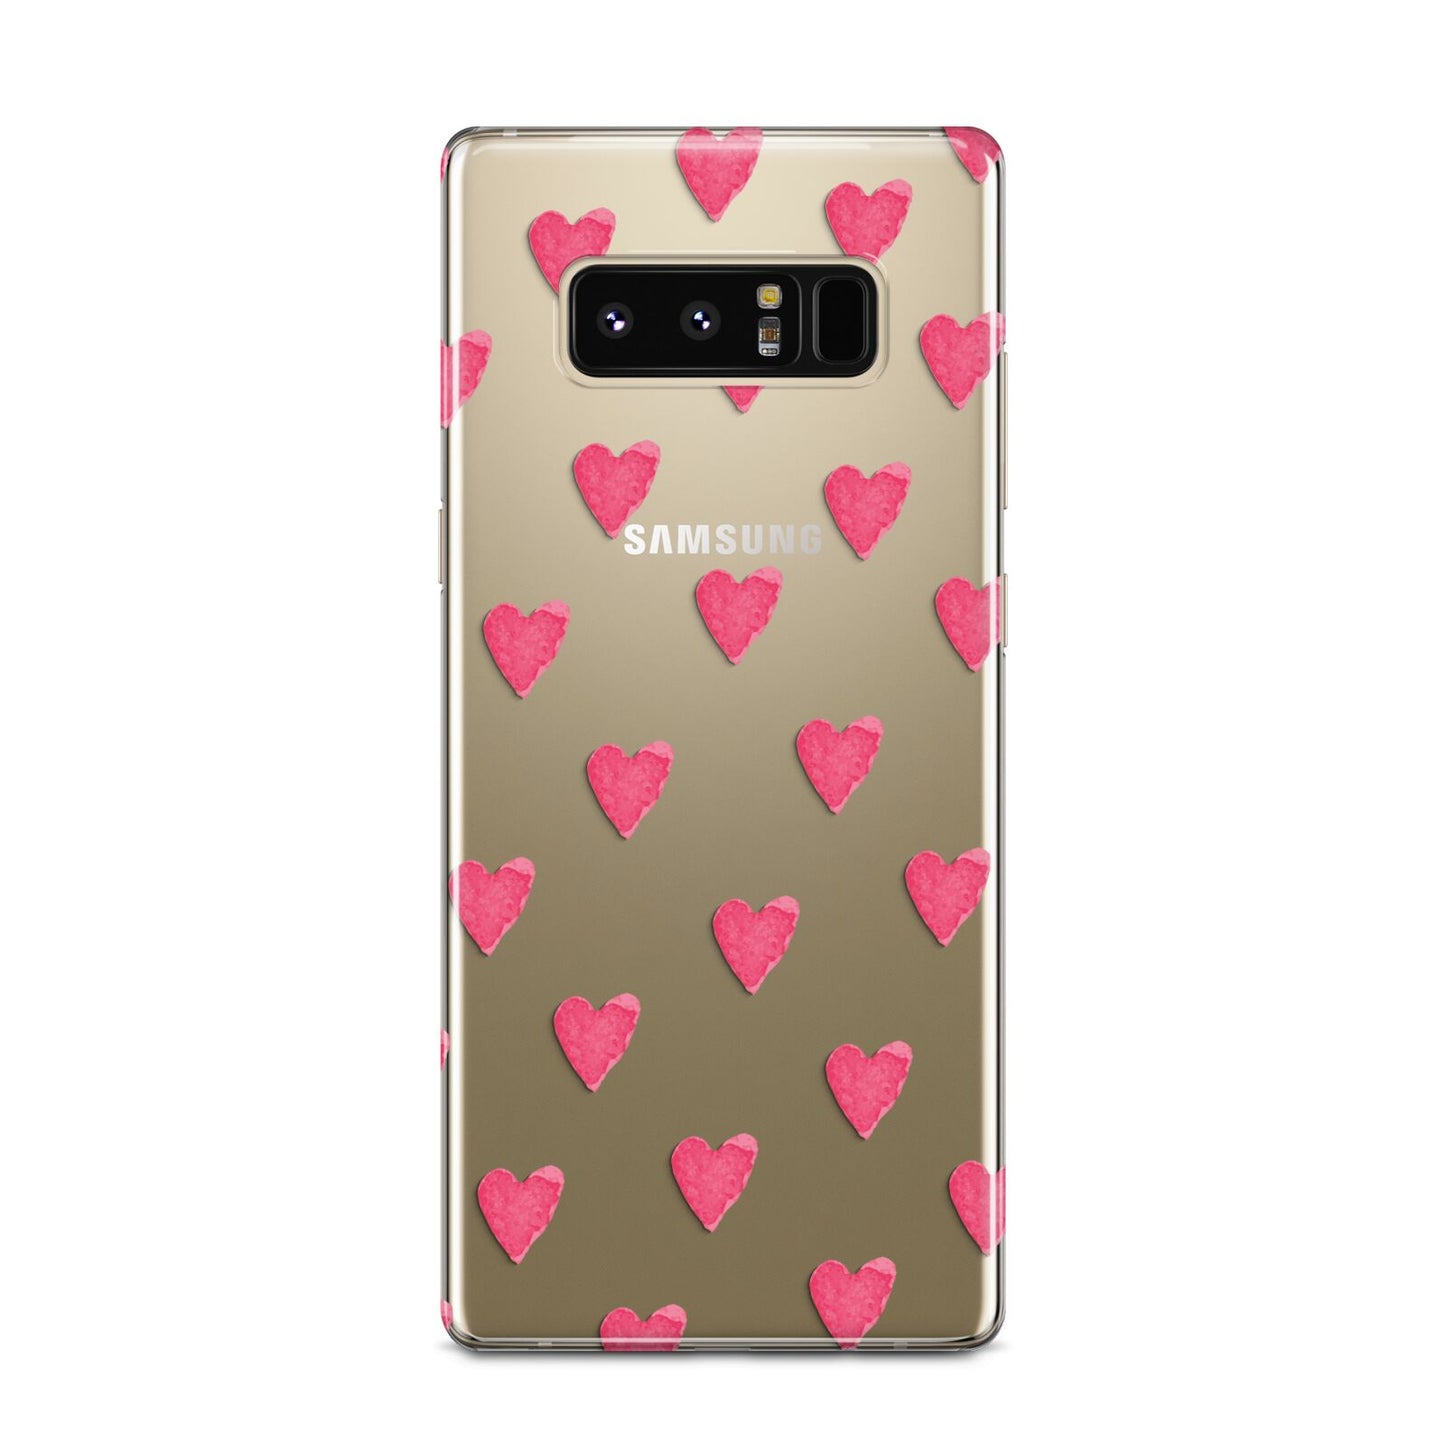 Heart Patterned Samsung Galaxy Note 8 Case